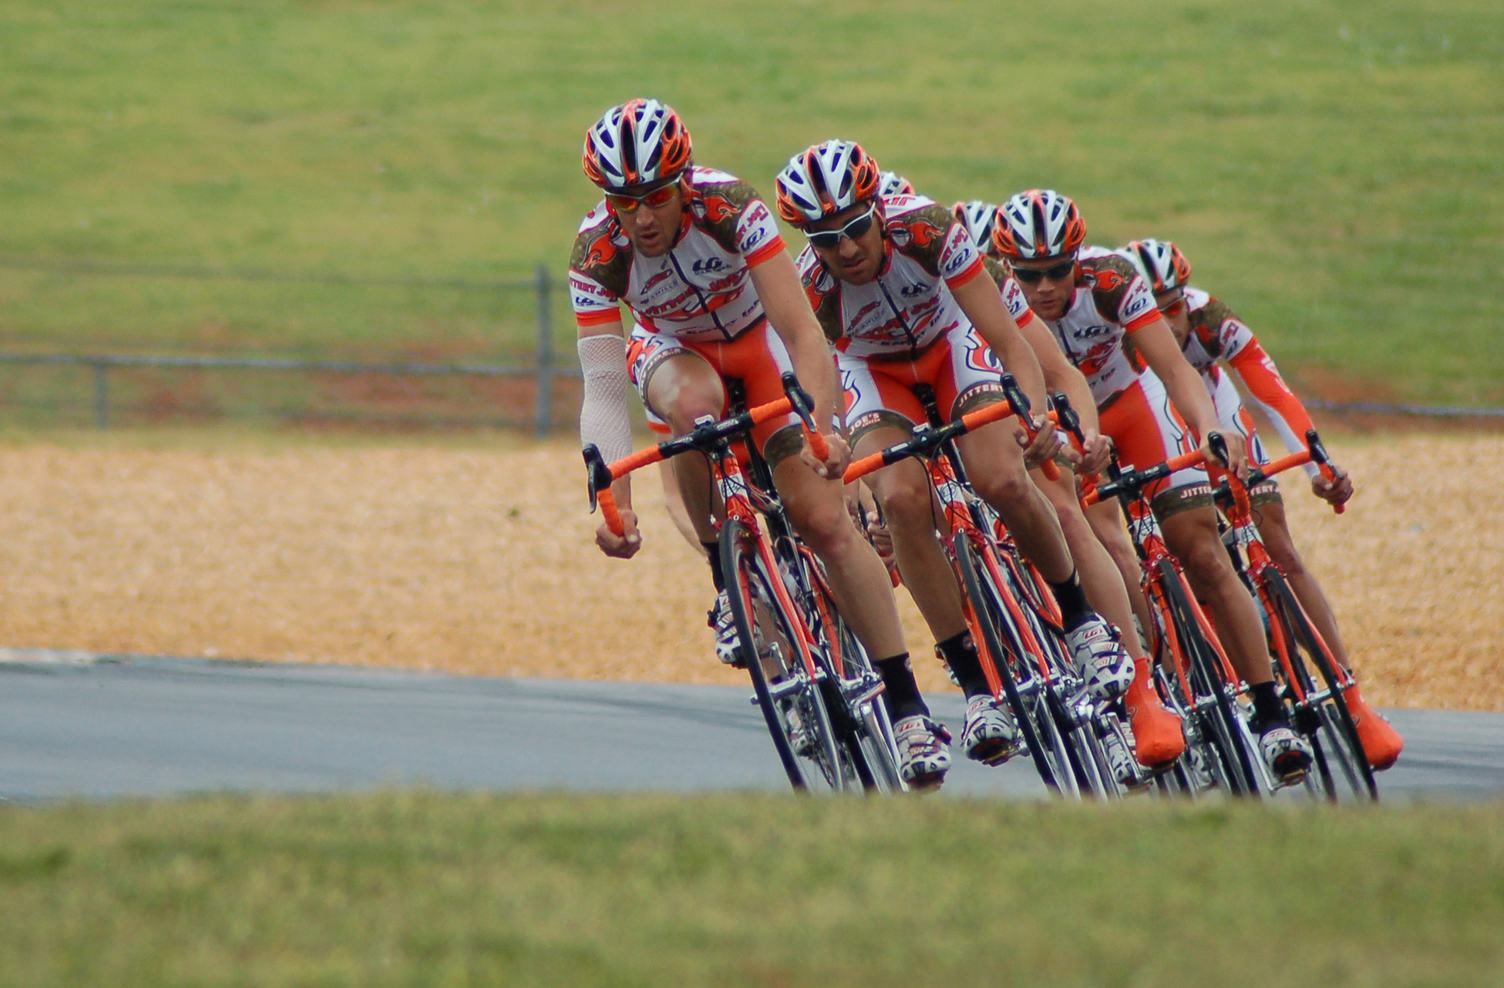 Team of Racing Cyclists During Training